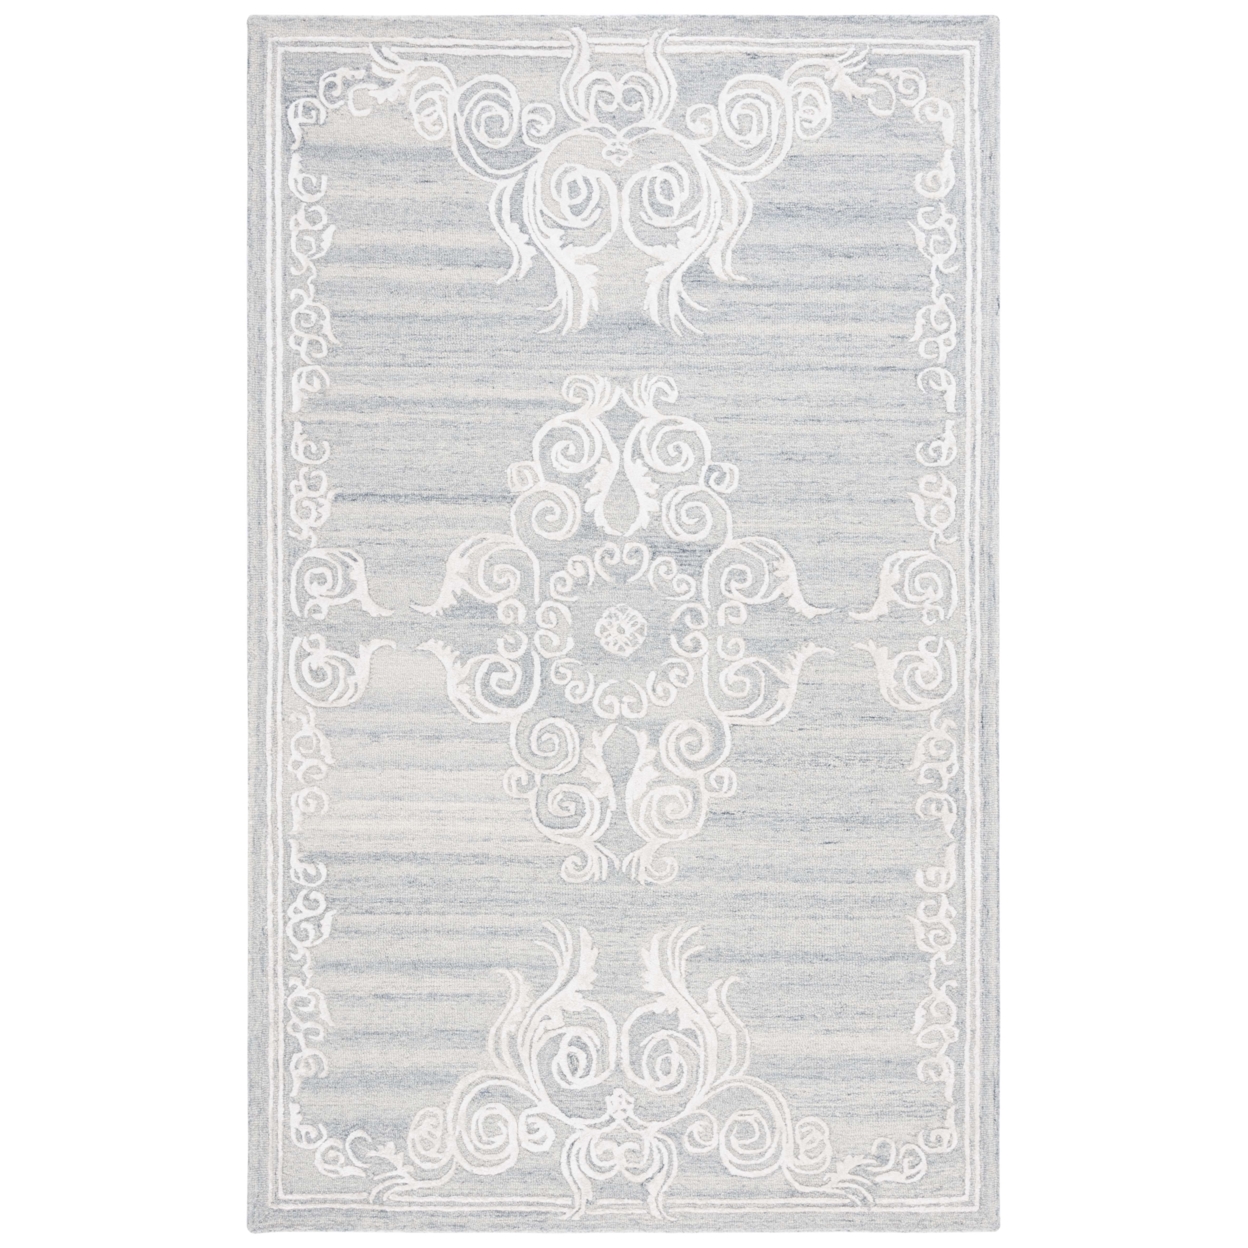 Safavieh GLM604G Glamour Silver / Ivory - Ivory / Brown, 6' X 9' Rectangle